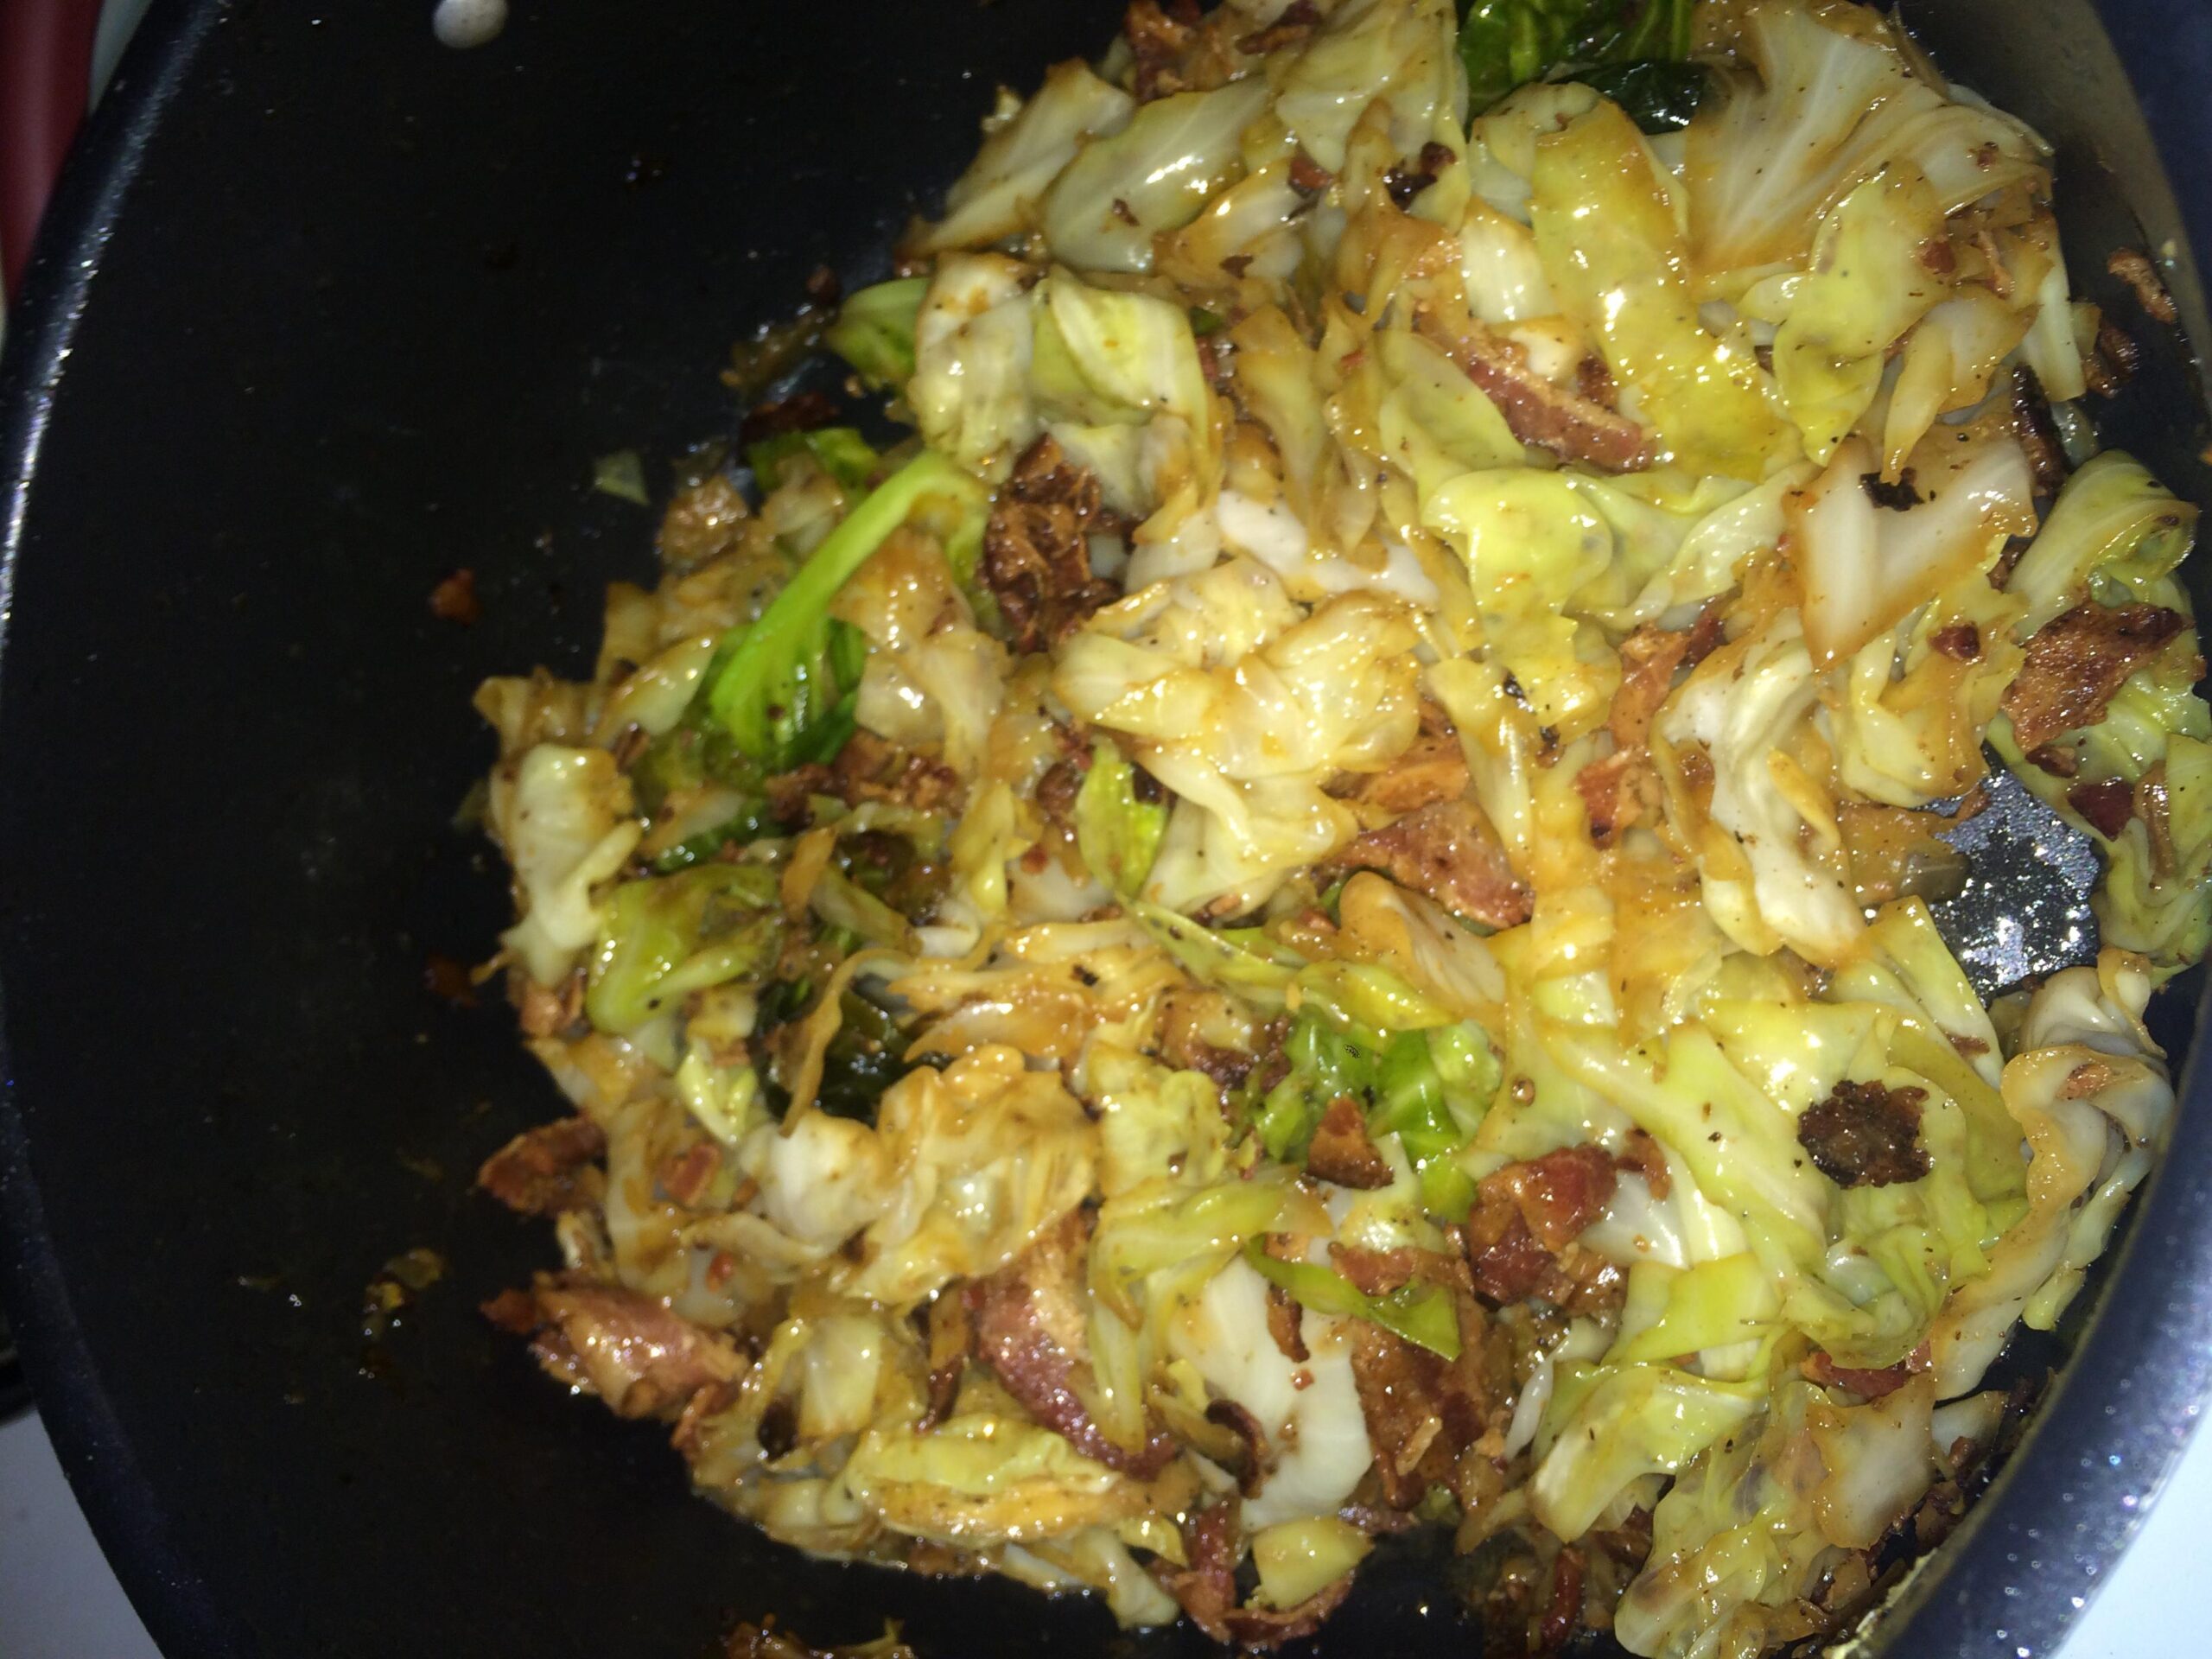  Savory and hearty: Southern Smothered Cabbage